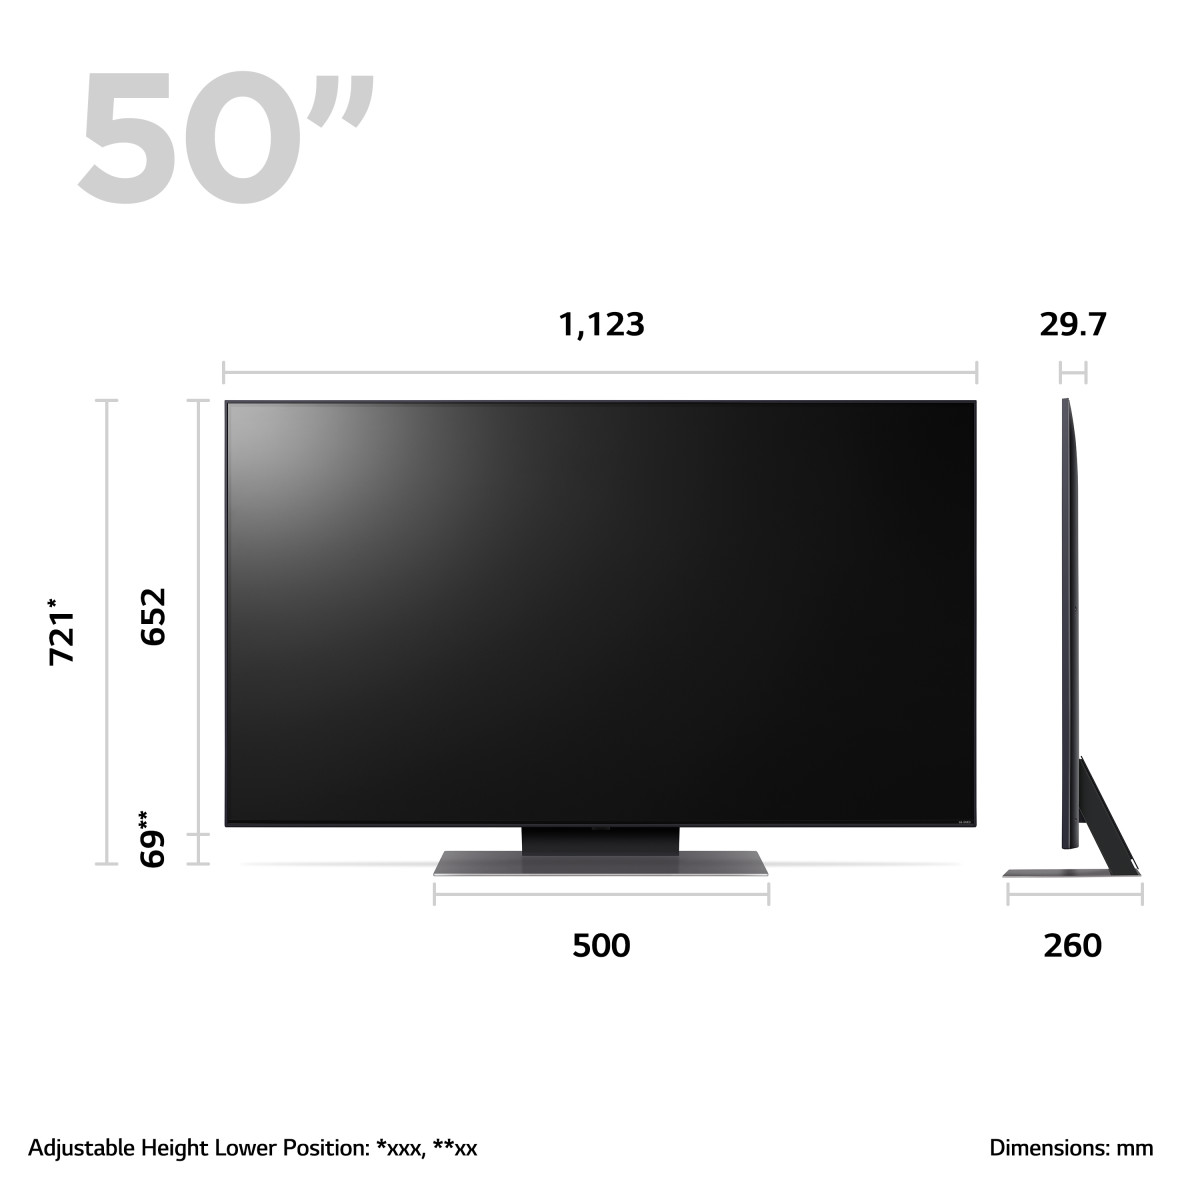 LG QNED QNED81 50 4K Smart TV